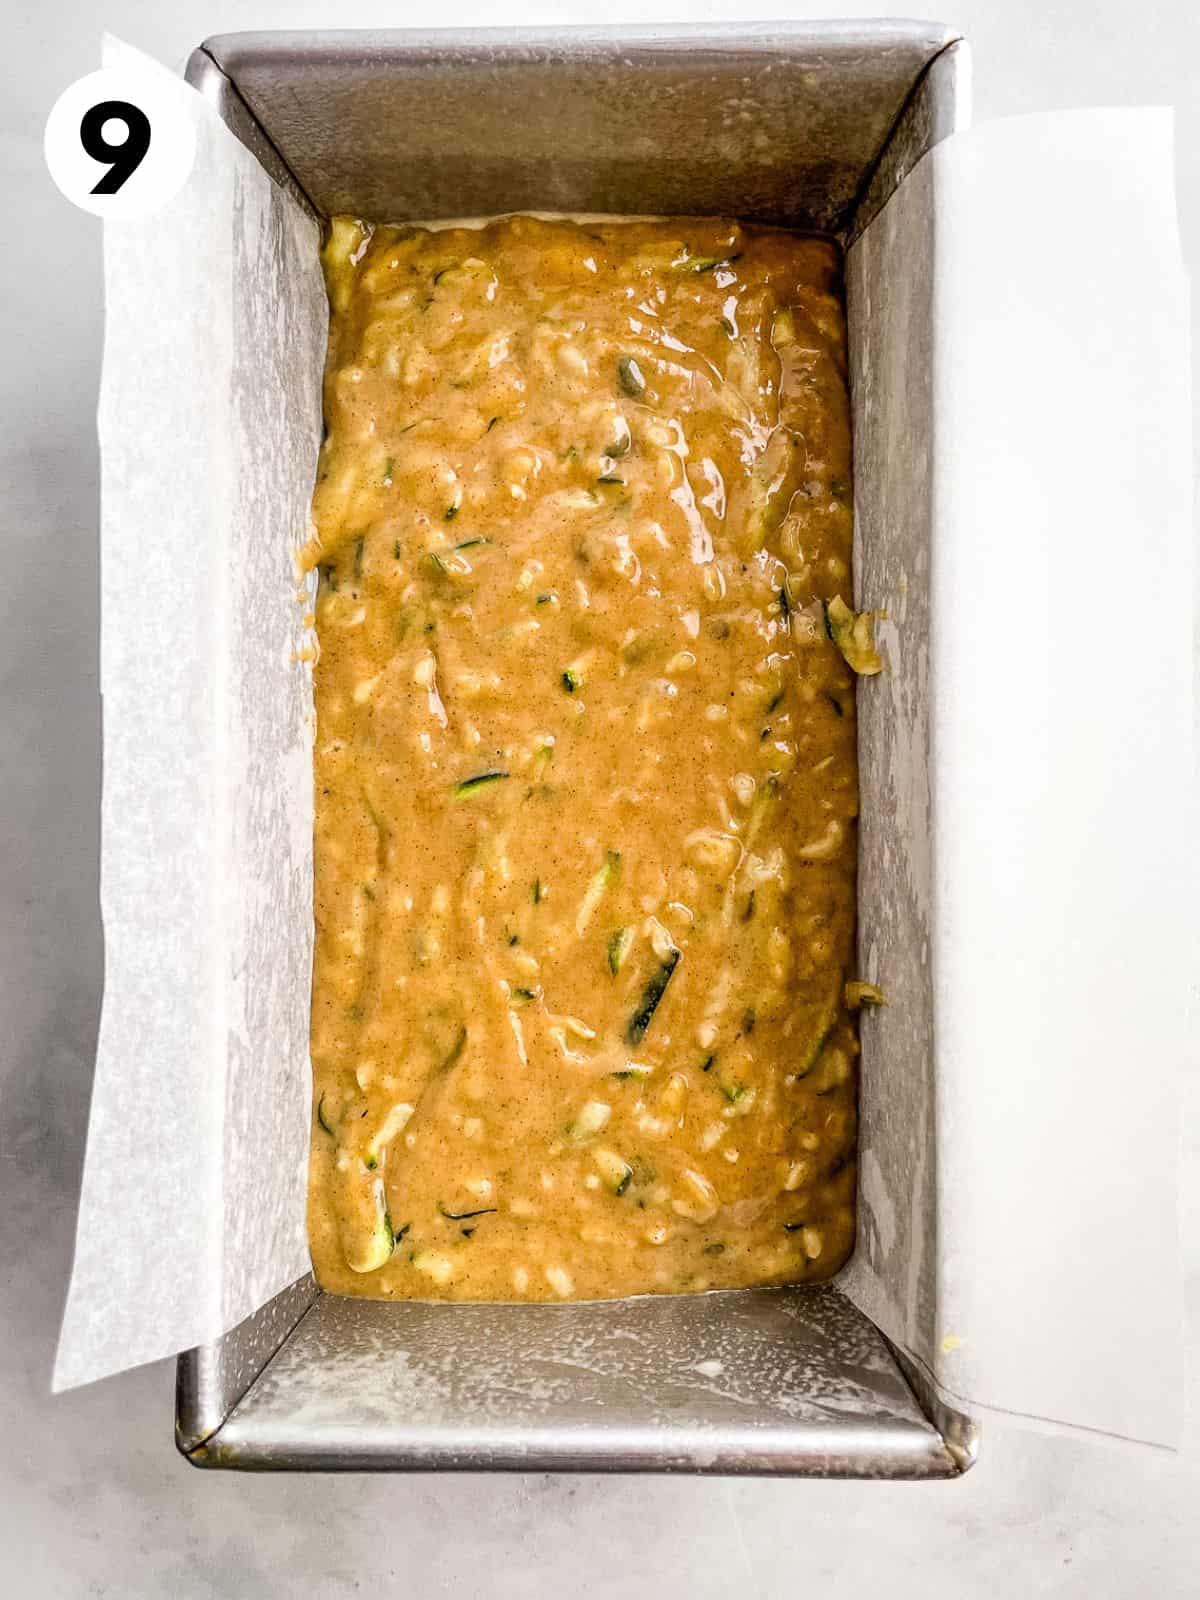 Gluten-free zucchini bread batter in a parchment-lined pan.